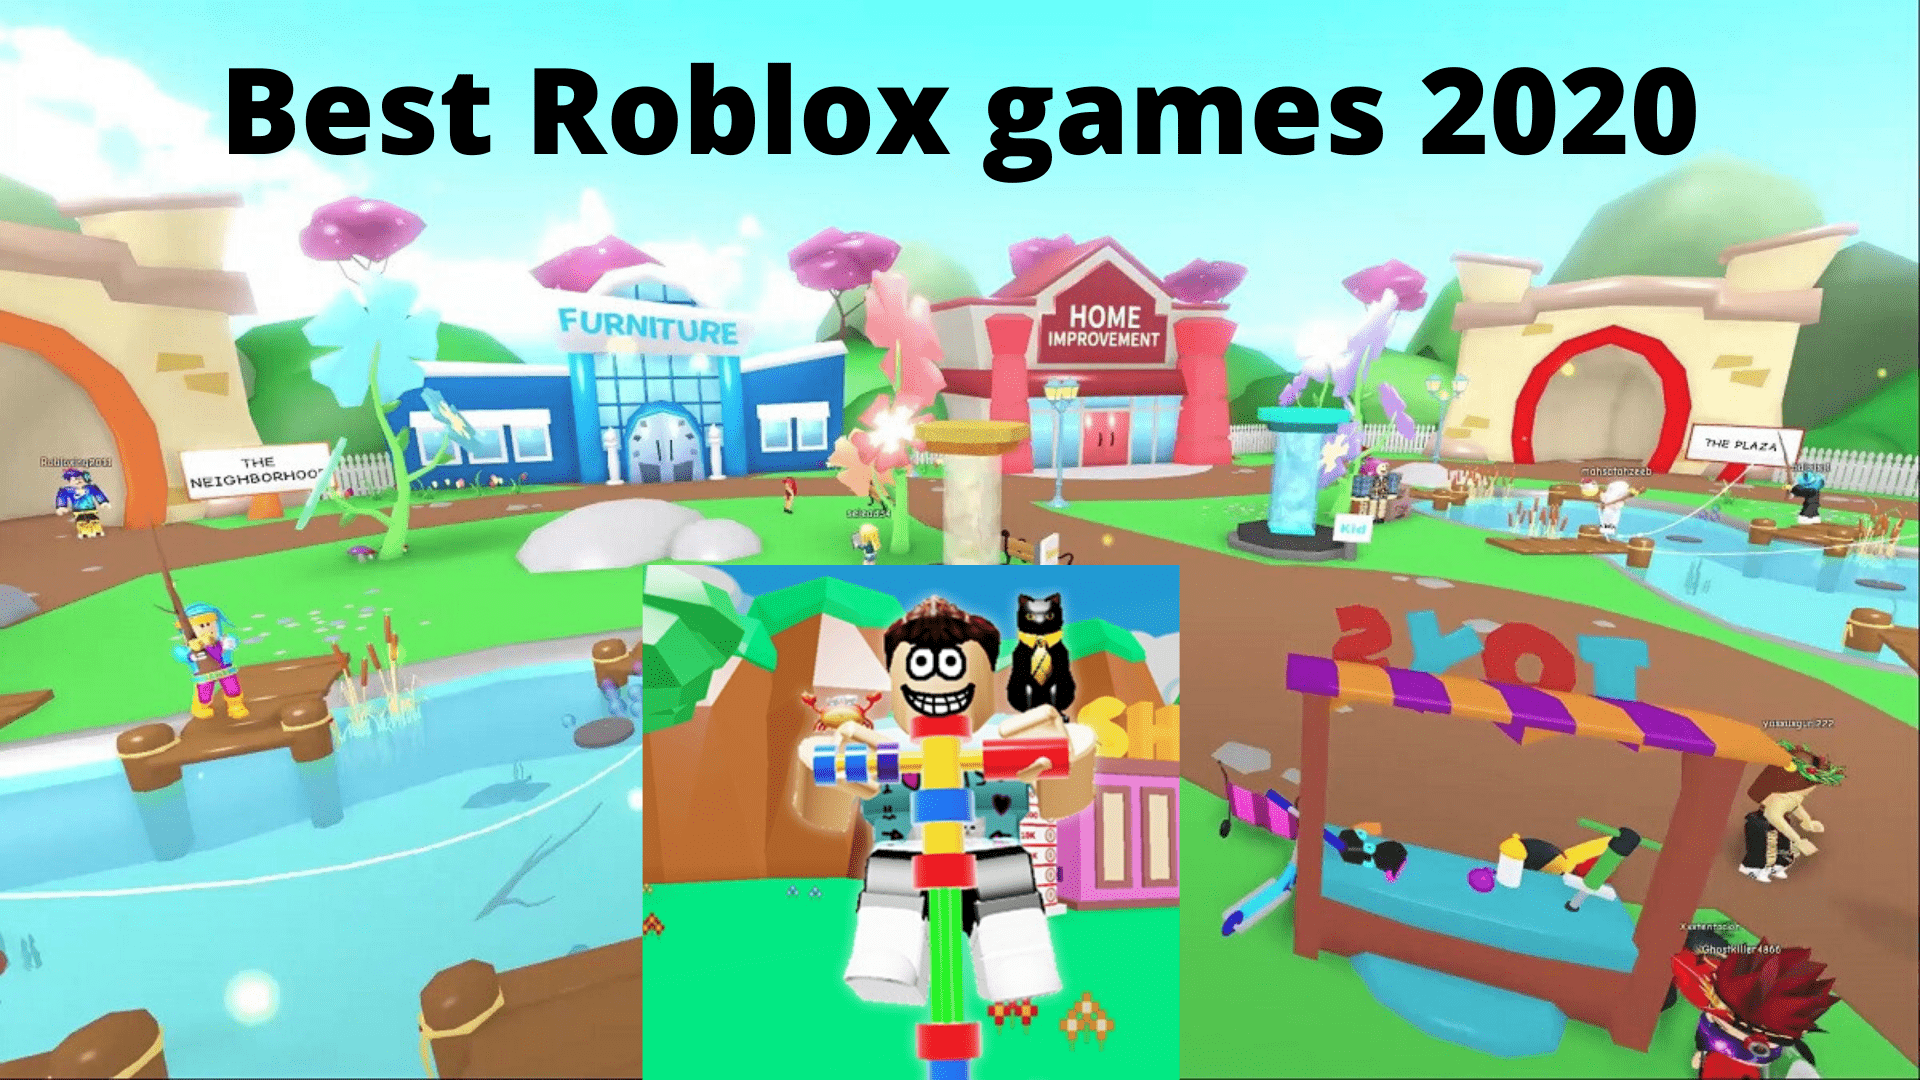 How To Get Roblox On Ps4 2020